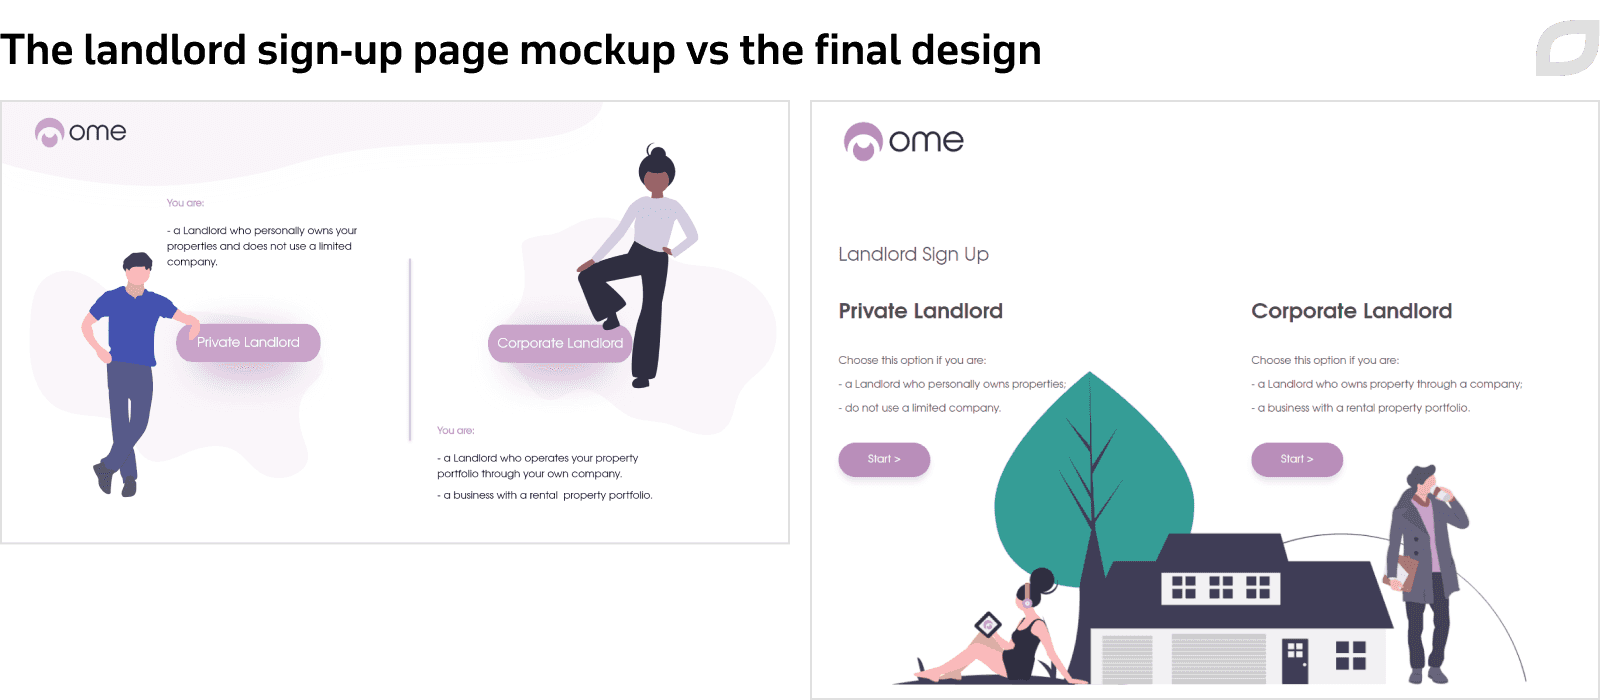 The landlord sign-up page mockup vs the final design